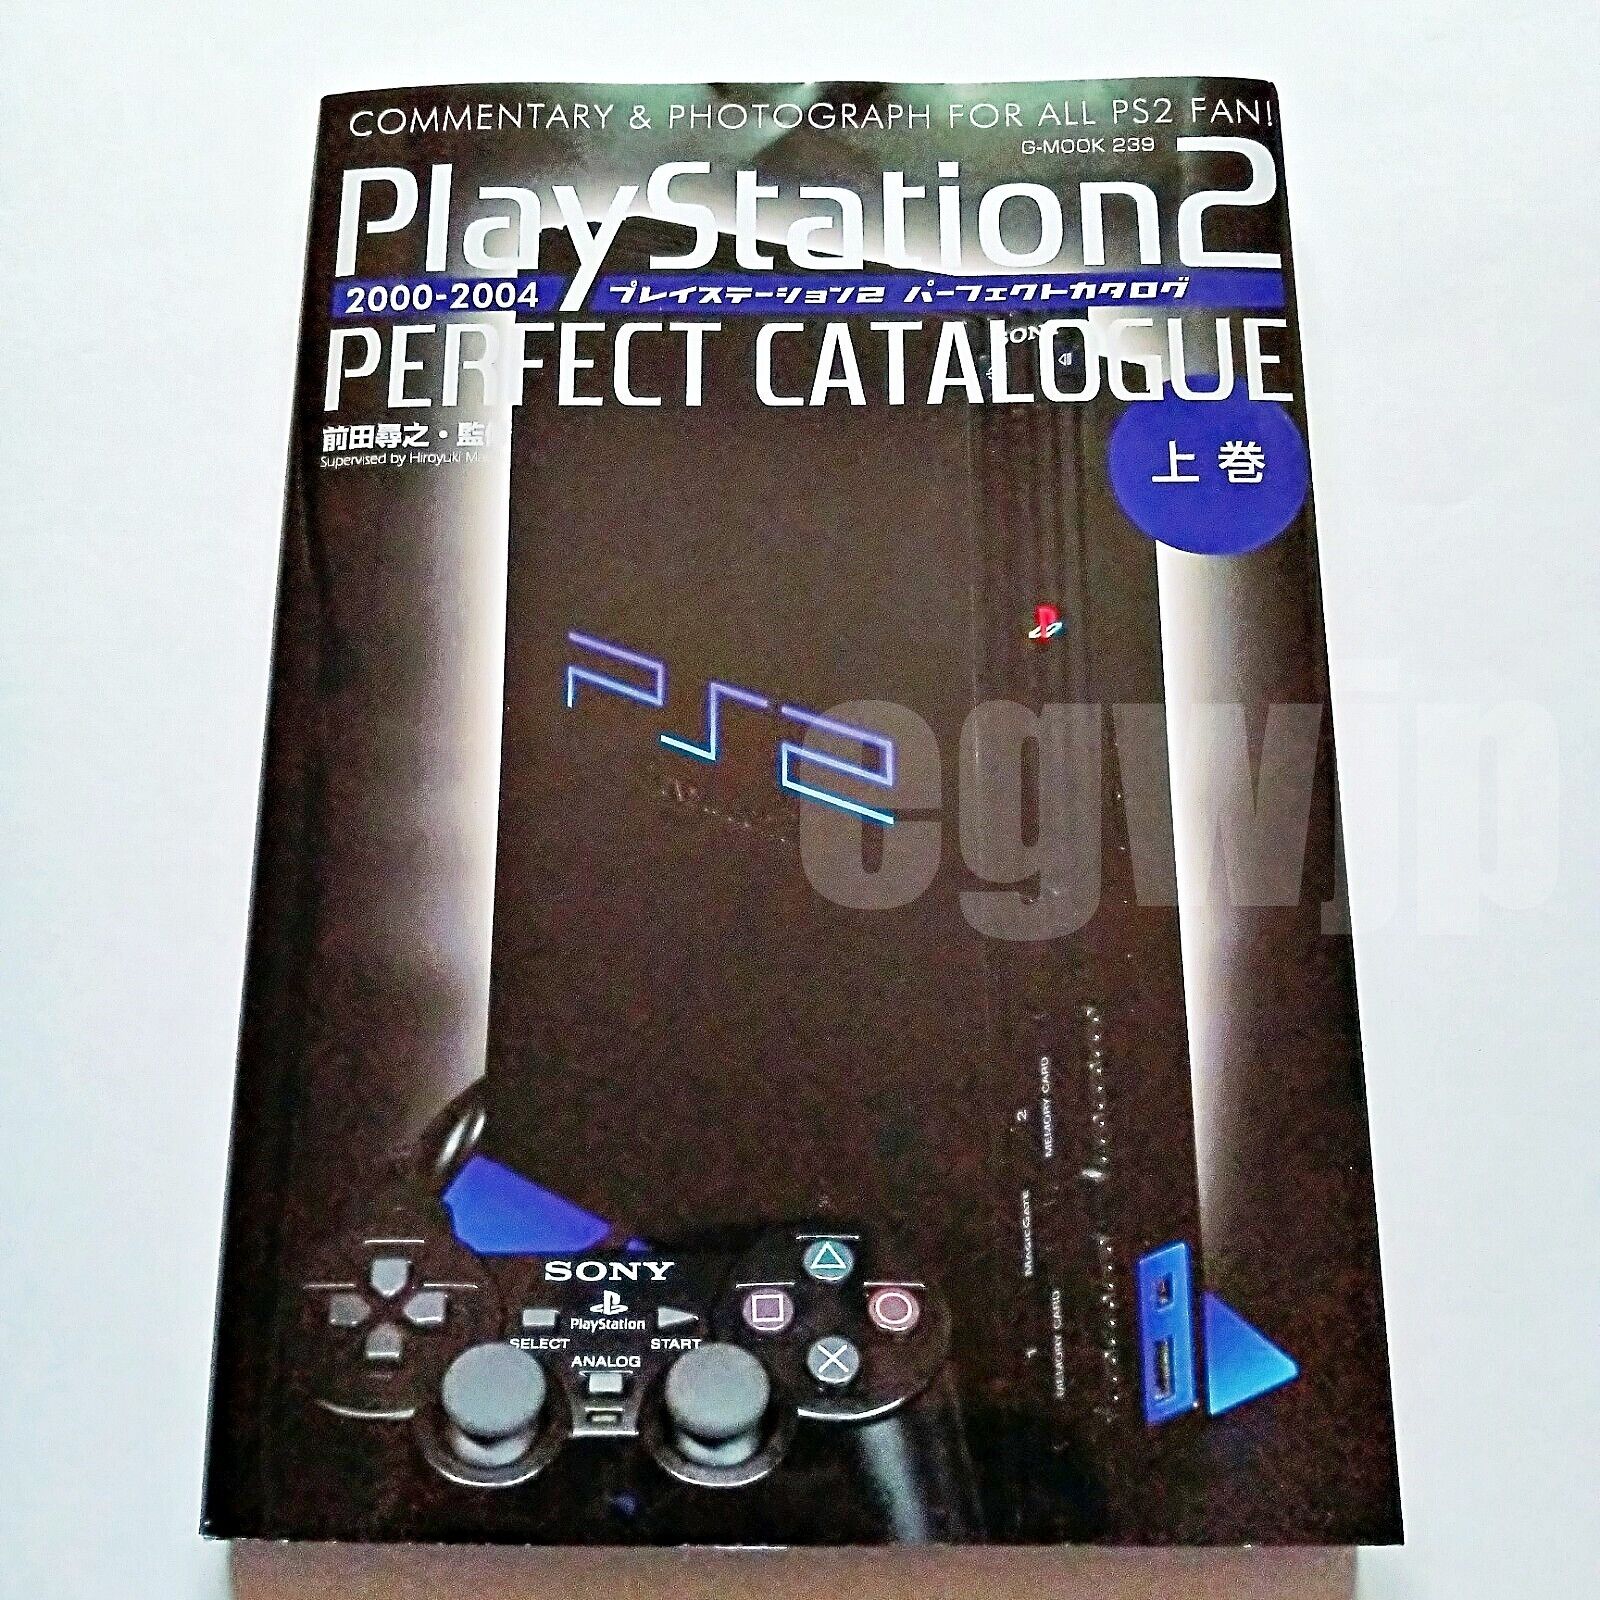 PlayStation 2 Perfect Catalog Vol.1 2000-2004 Japanese Game Guide Book PS2 Sony